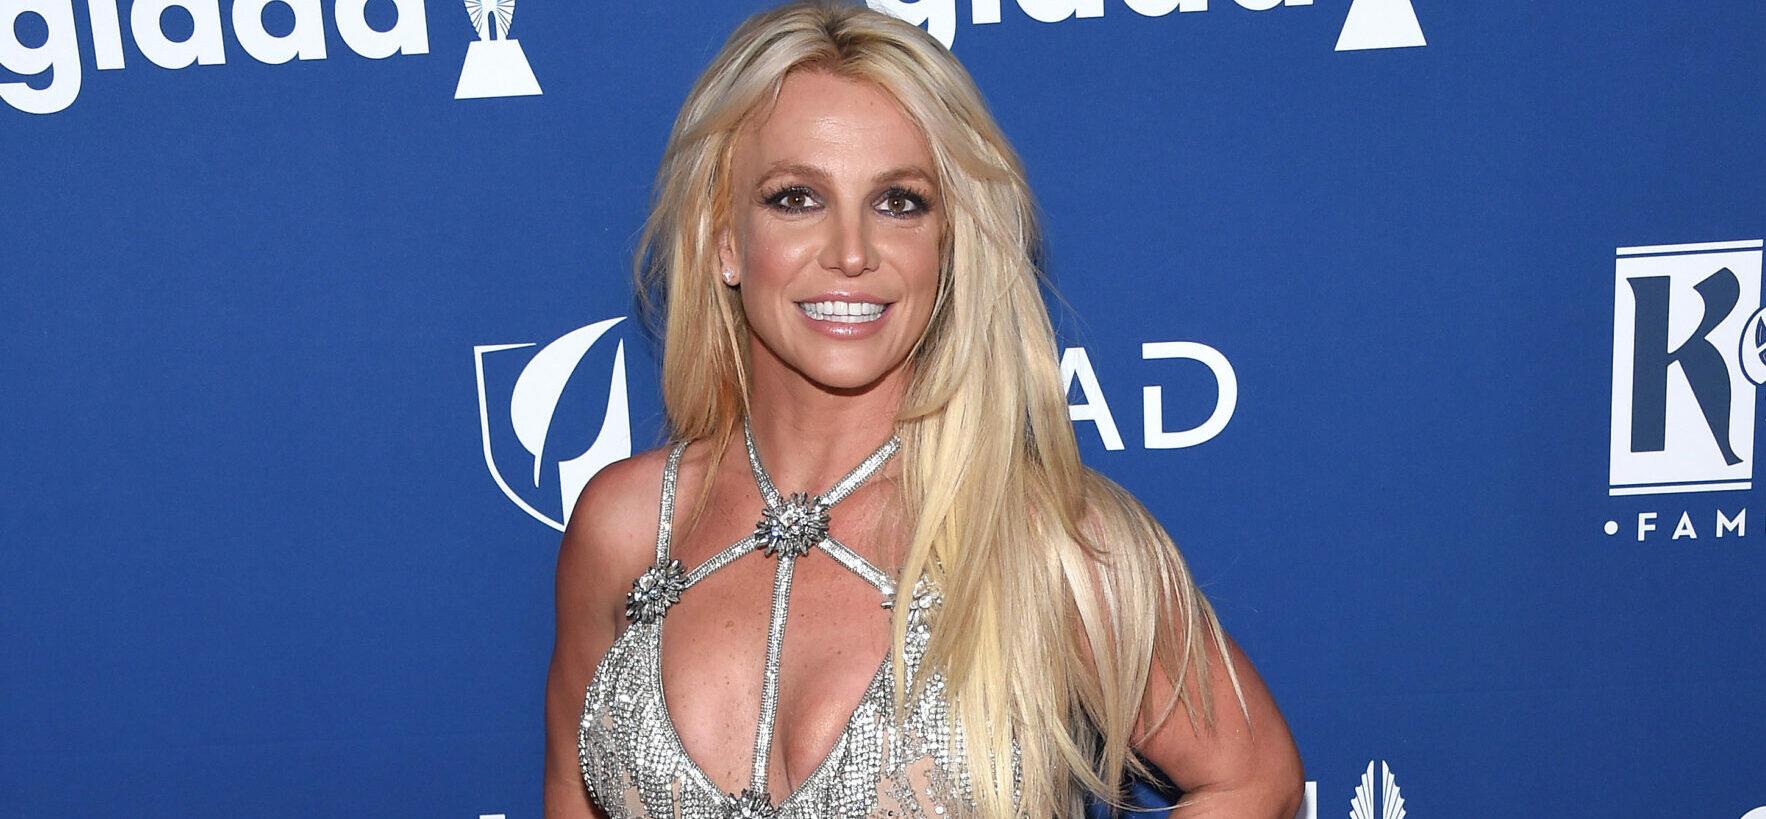 Britney Spears Teases New Music In Spicy Instagram Video: ‘Get Naked’